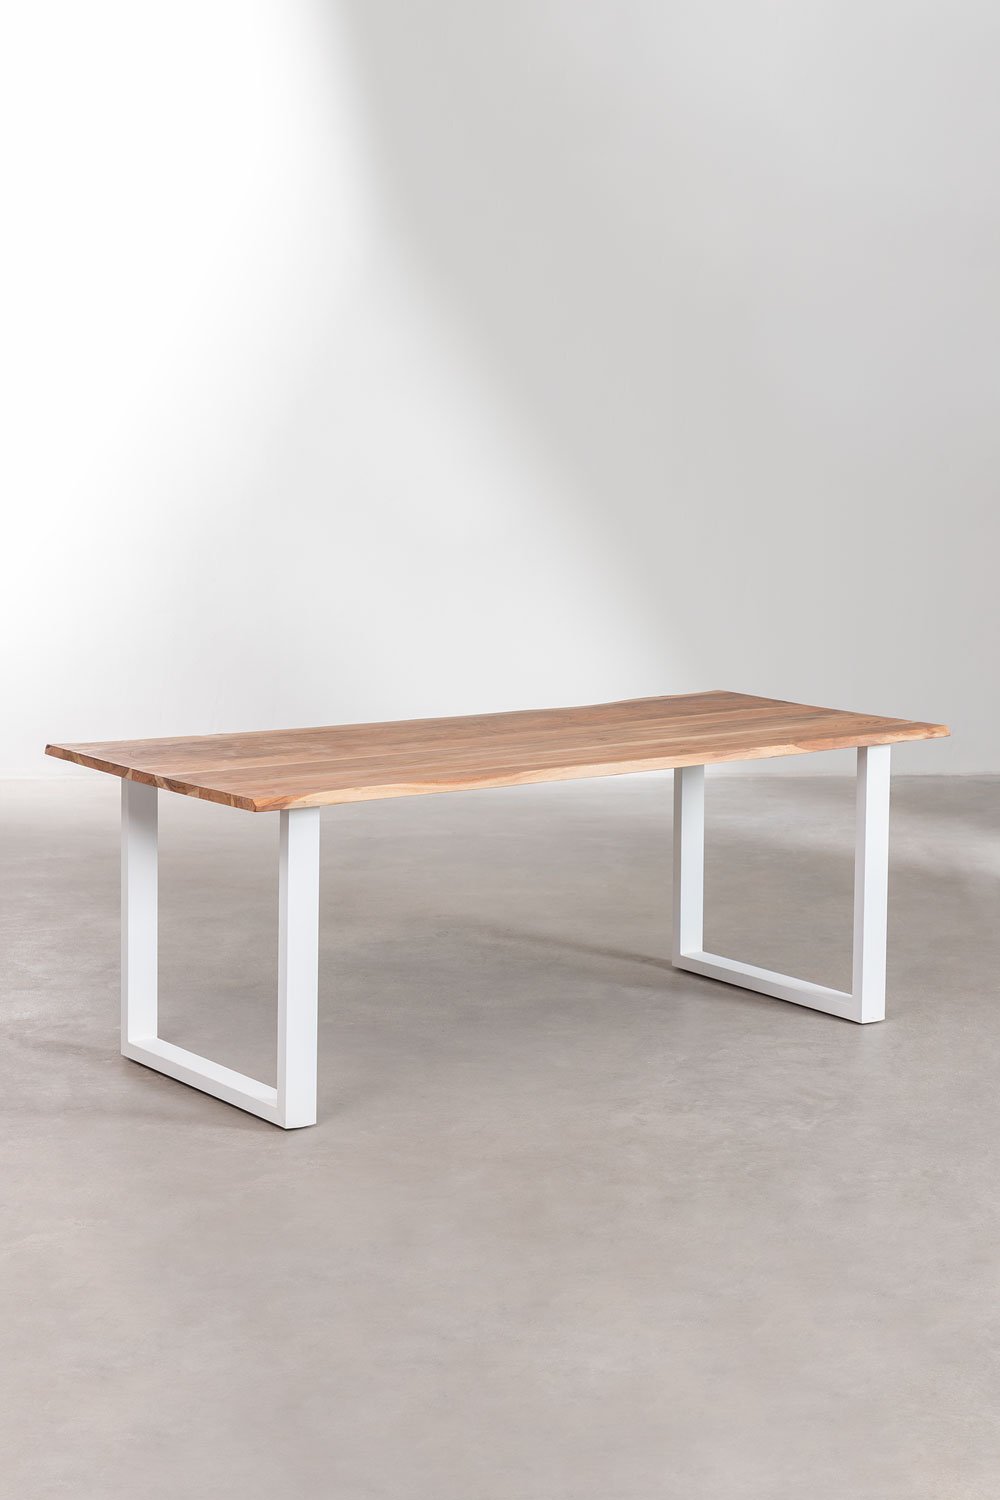 Sami Recycled Wood Rectangular Dining Table, gallery image 1